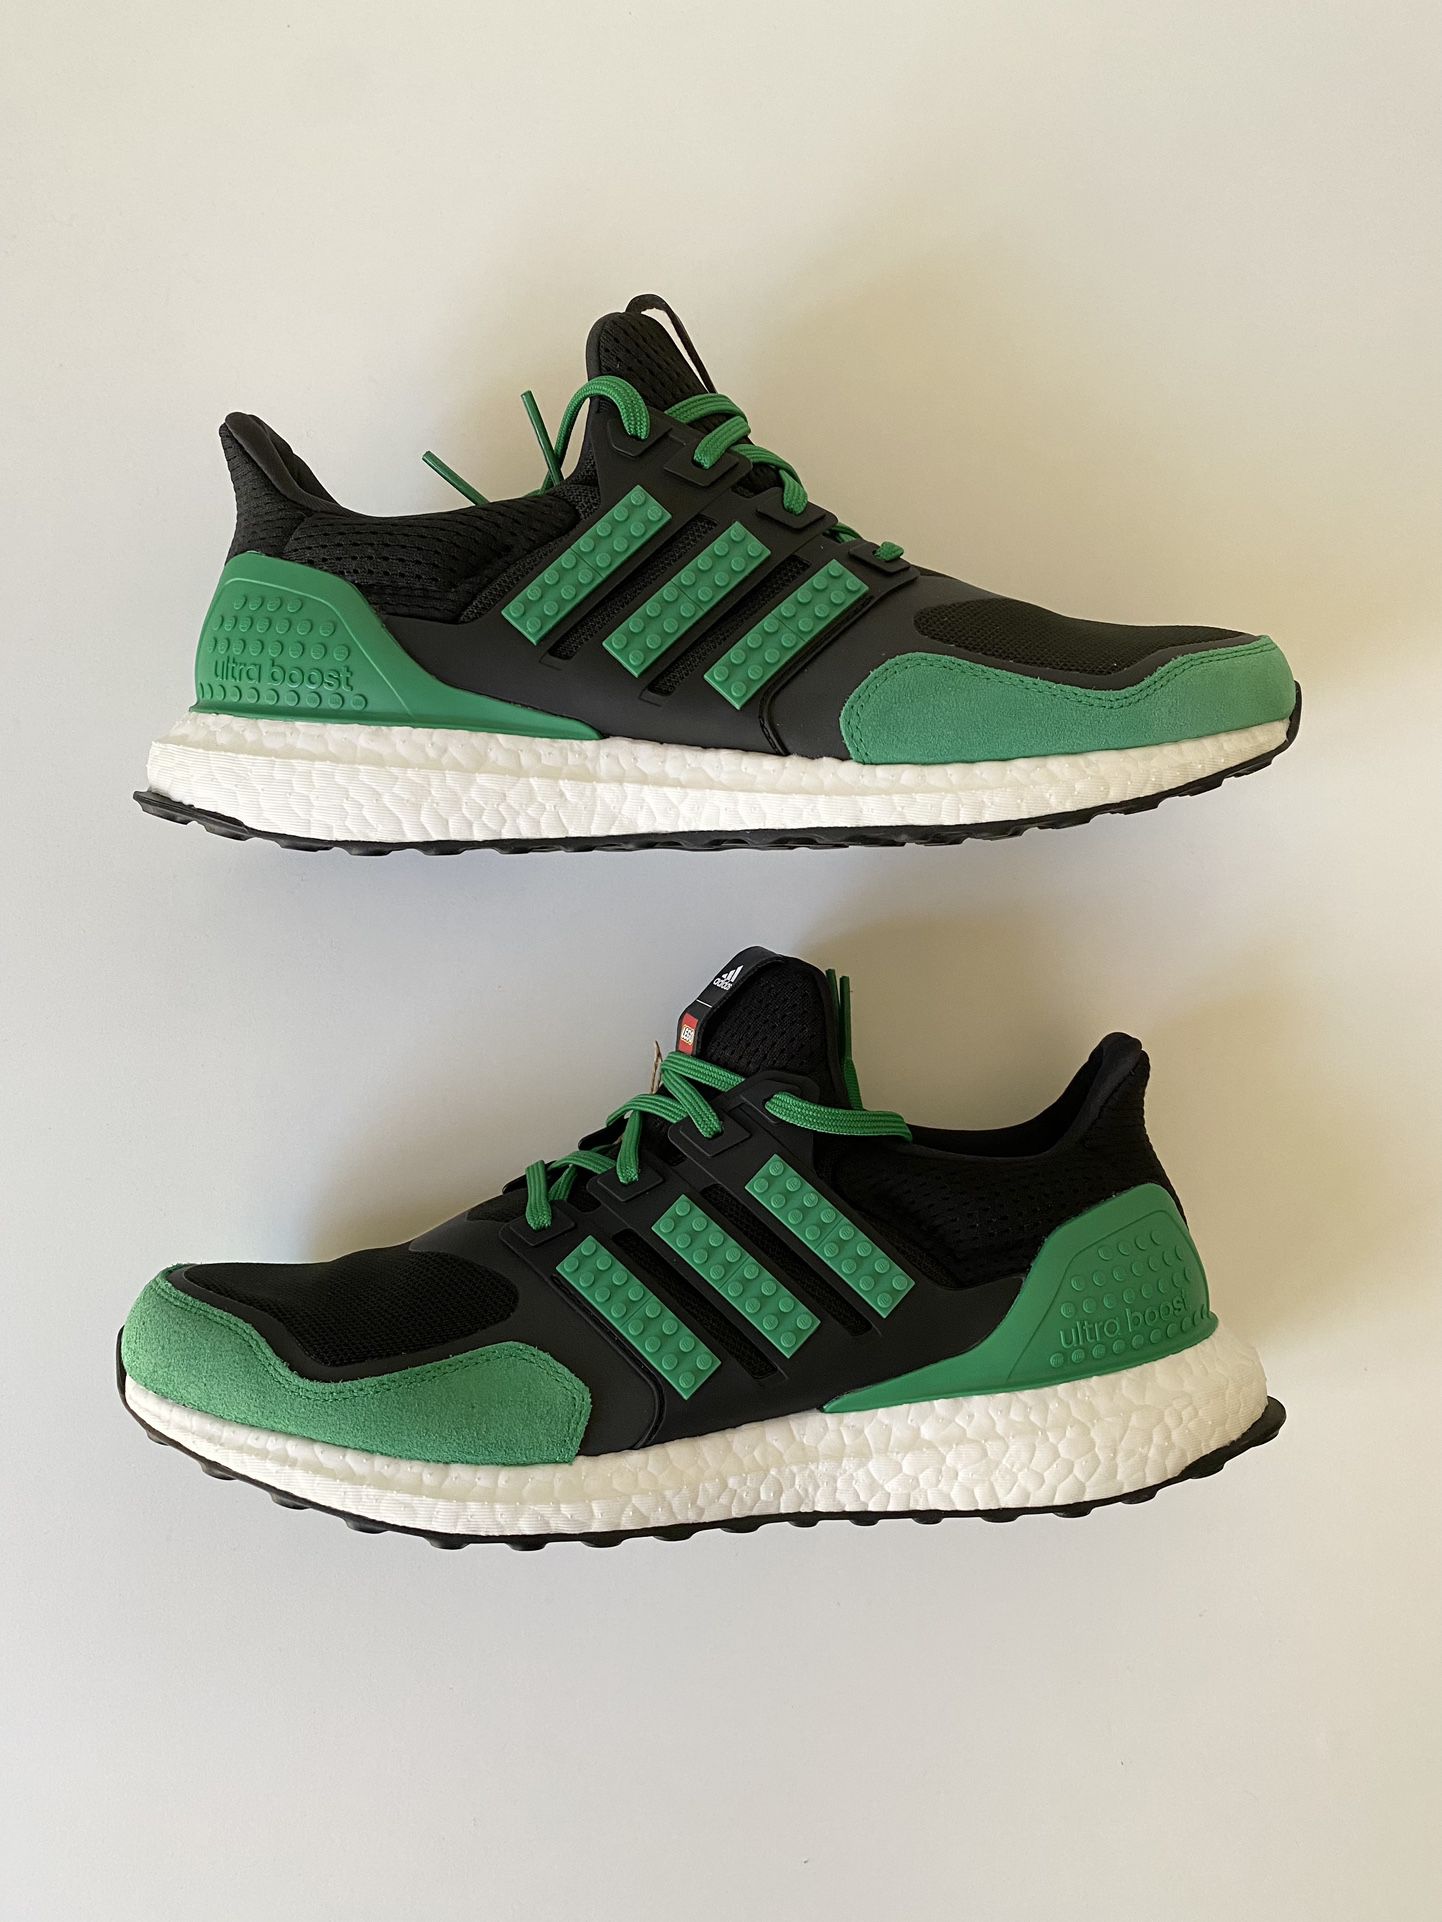 Adidas Lego Size for Sale in Los Angeles, CA - OfferUp